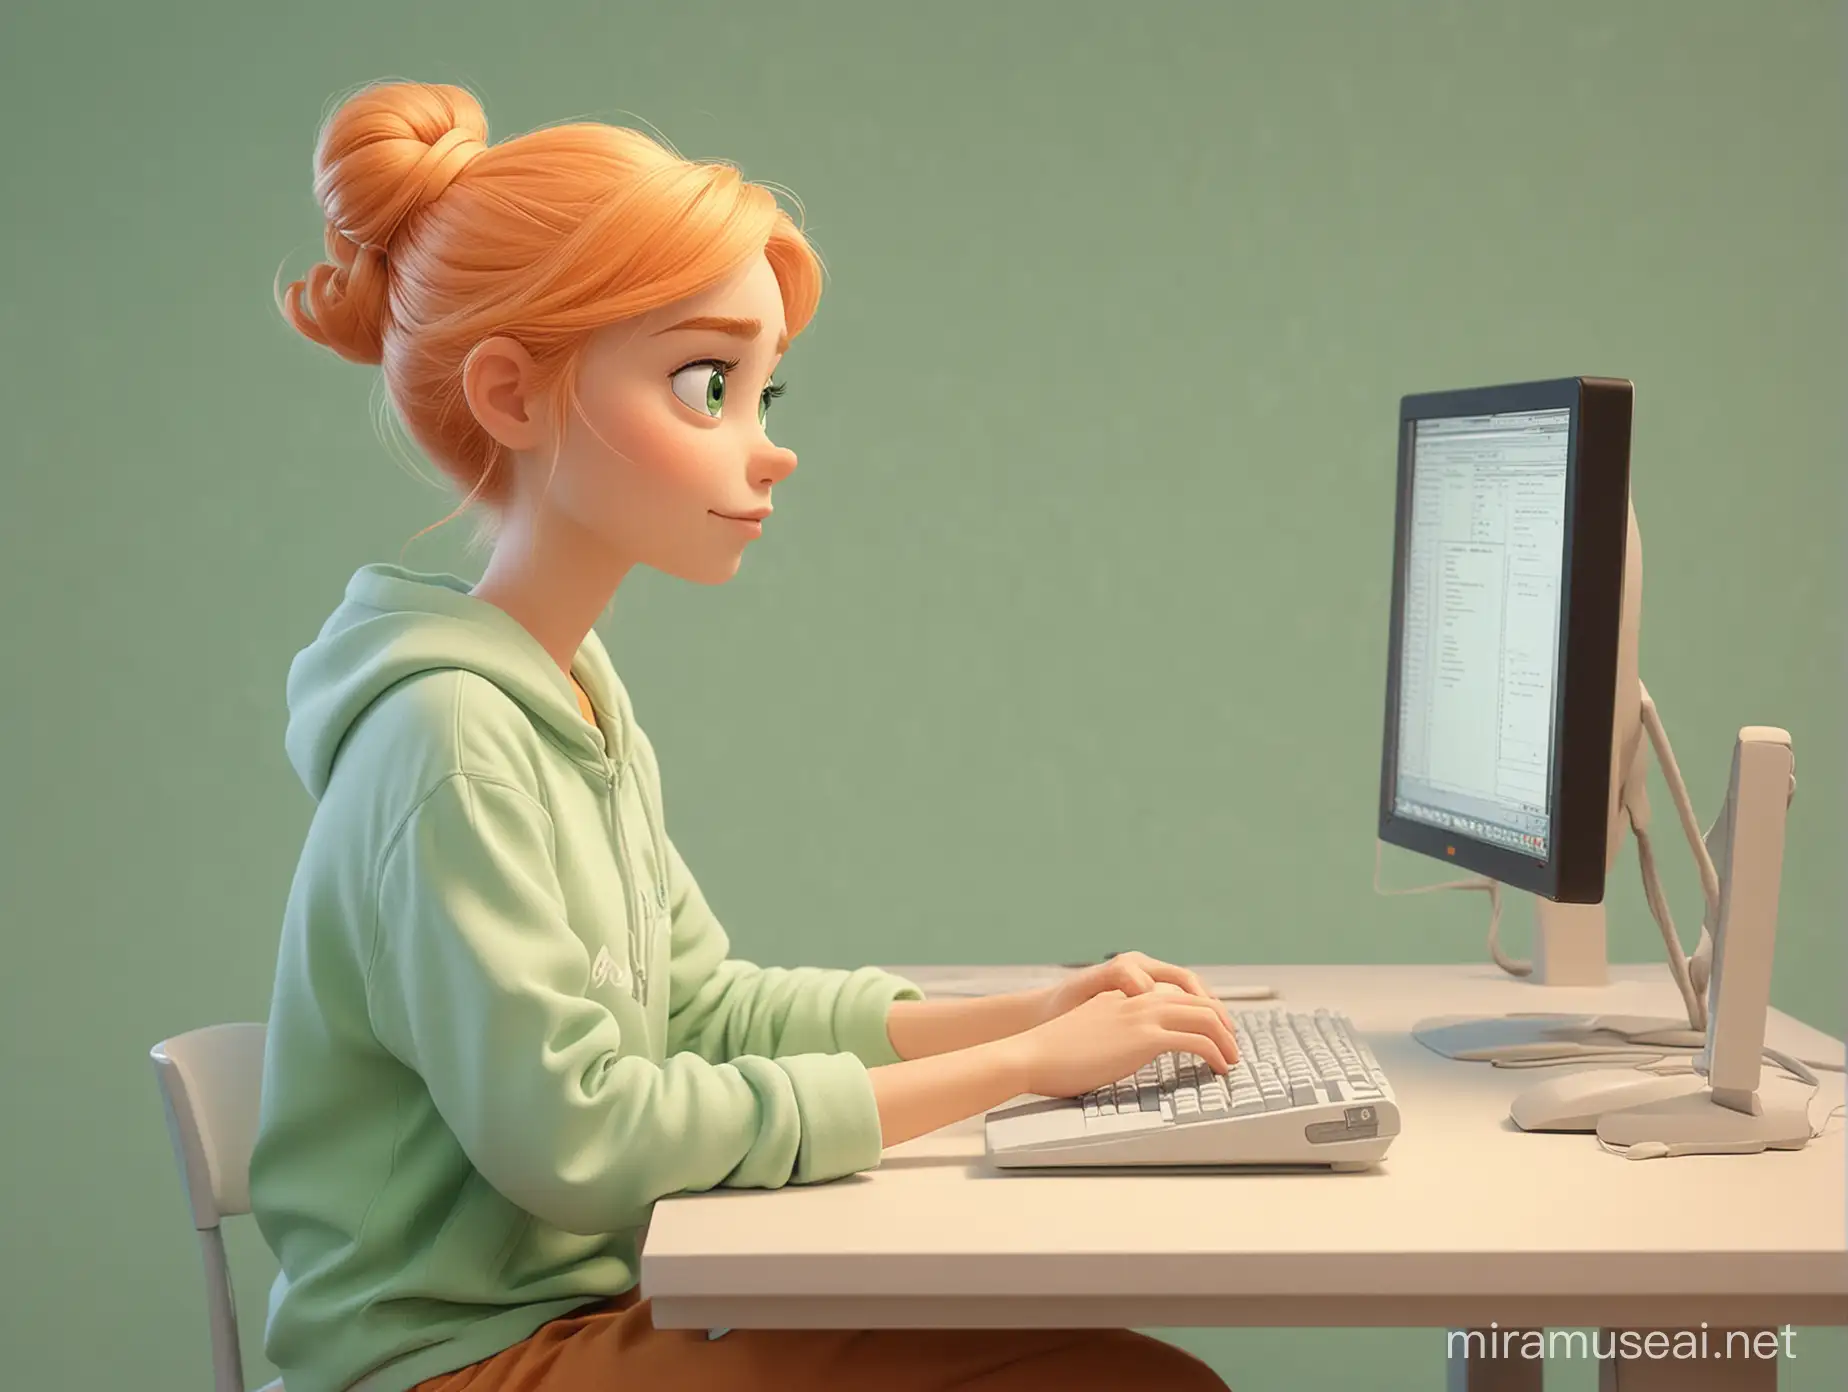 Disney Style Programmer Working in PastelColored Environment